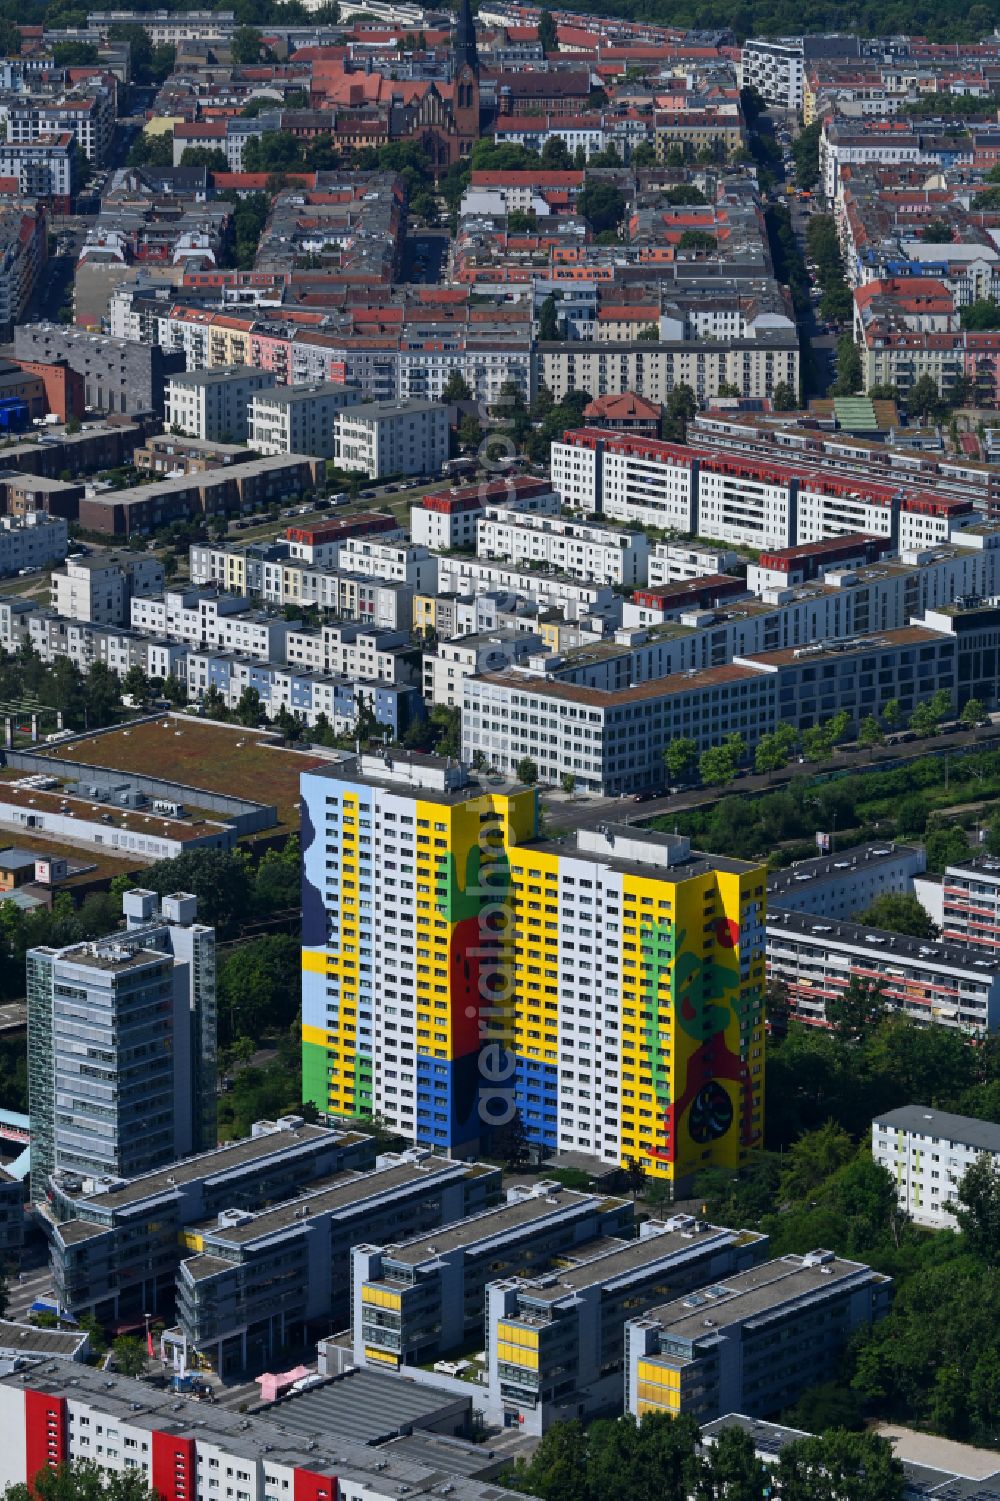 Berlin from the bird's eye view: High-rise building in the residential area Gustavovo-Haus on Franz-Jacob-Strasse in the Lichtenberg district of Berlin, Germany